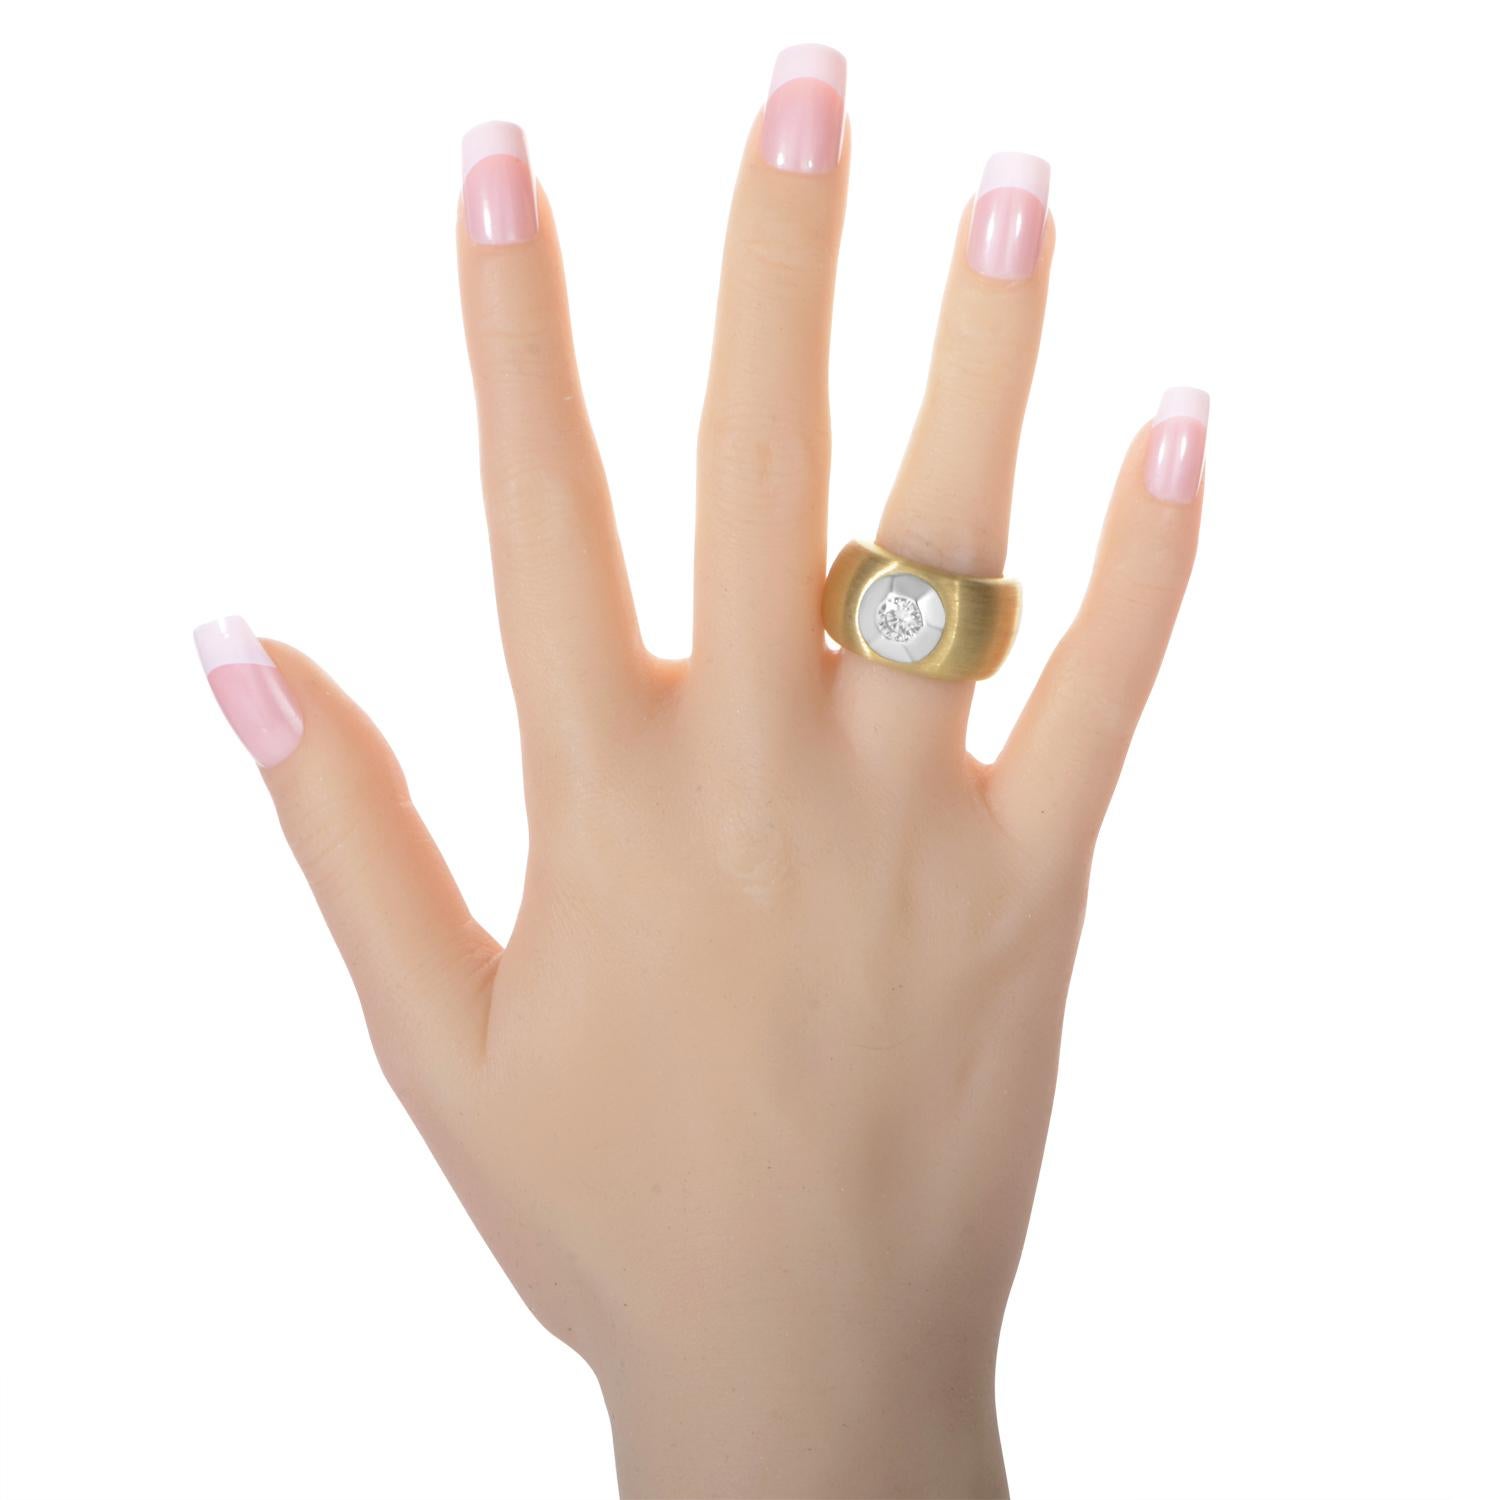 This tastefully designed ring from Pasquale Bruni is perfect for any lady. The thick band is made of brushed 18K yellow gold and features a .73ct diamond set in a white gold bezel.<Br/>Ring Top Dimensions: 14 x 14mm
